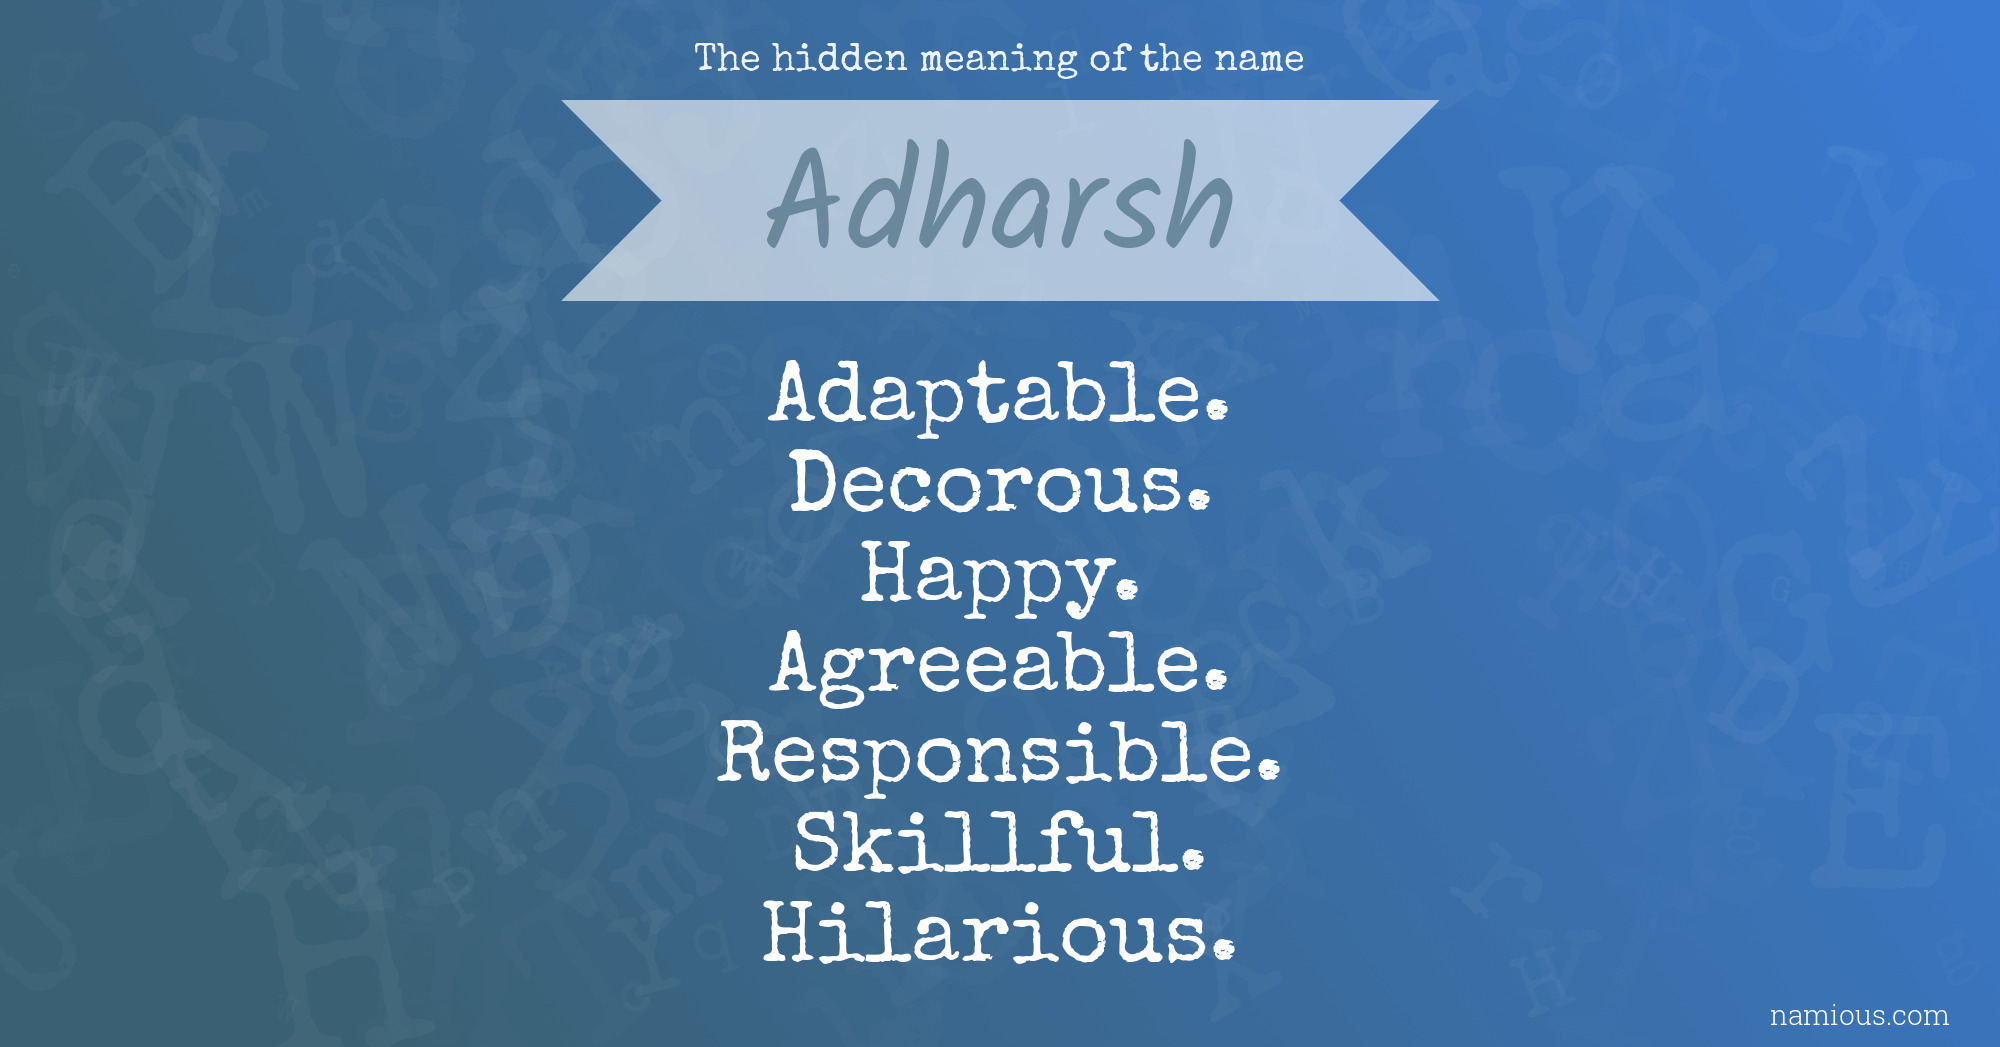 The hidden meaning of the name Adharsh